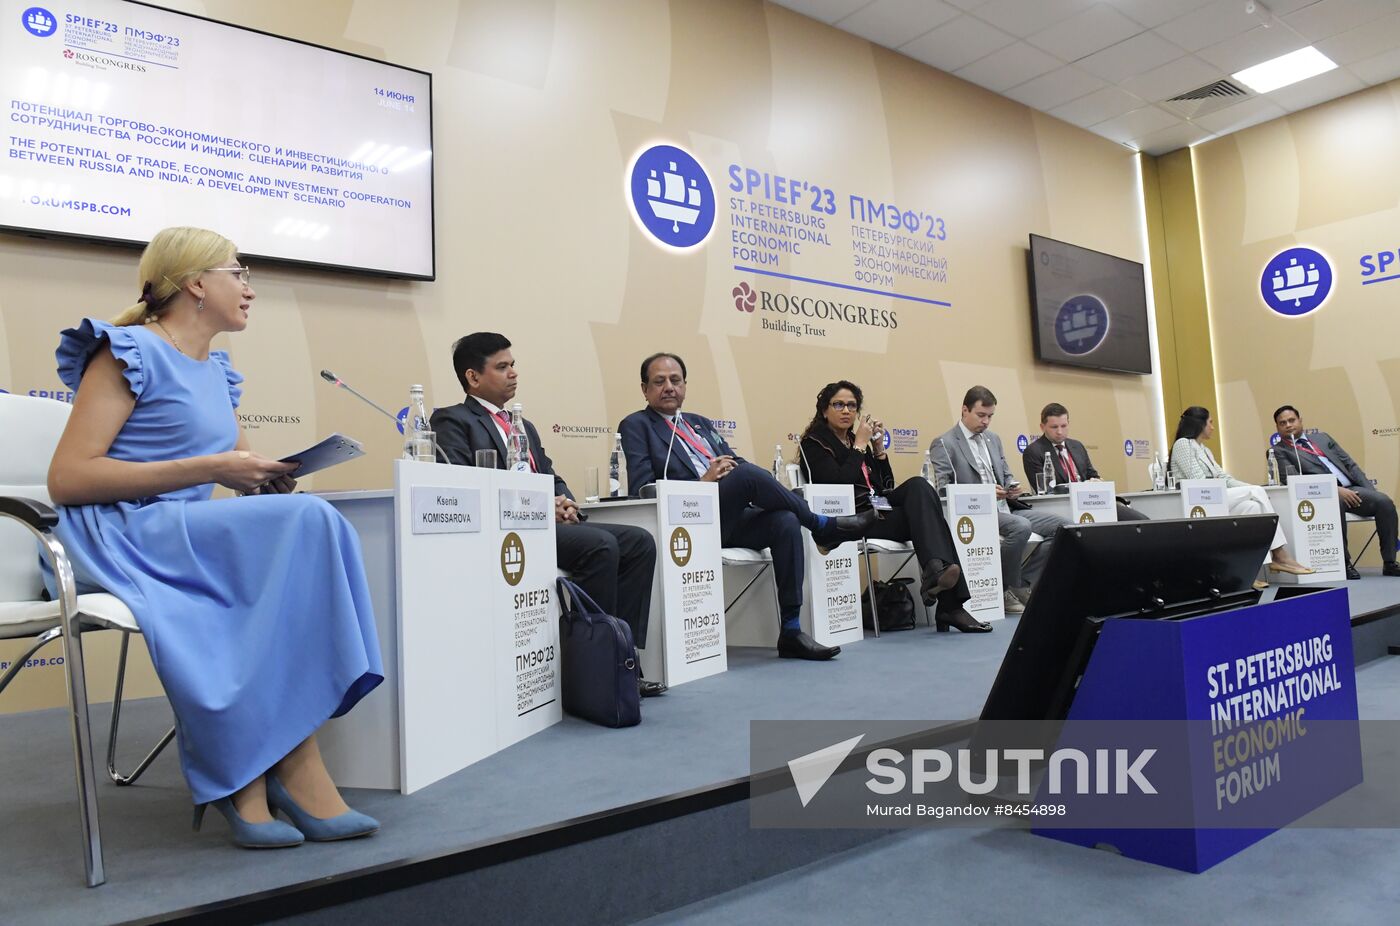 SPIEF-2023. Potential of Trade, Economic and Investment Cooperation Between Russia and India: A Development Scenario